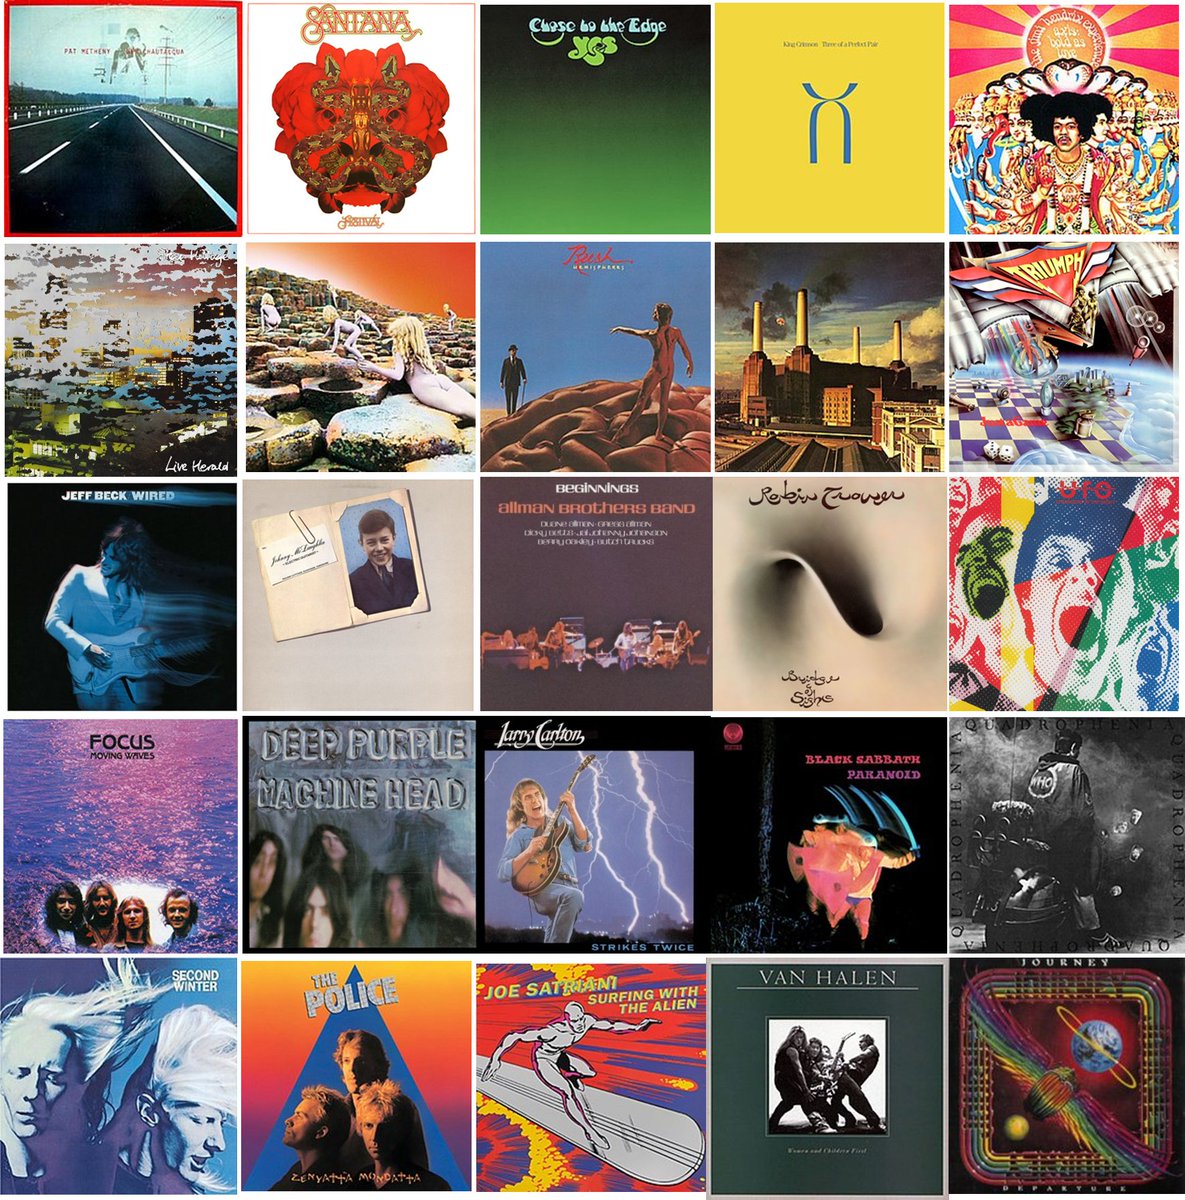 If I had to pick 25 'desert island' guitar albums that are albums I've listened to for most of my life... and I KNOW I'm missing some great ones, but this would be a solid collection. Anyone else want to take the '25 essential albums challenge?'